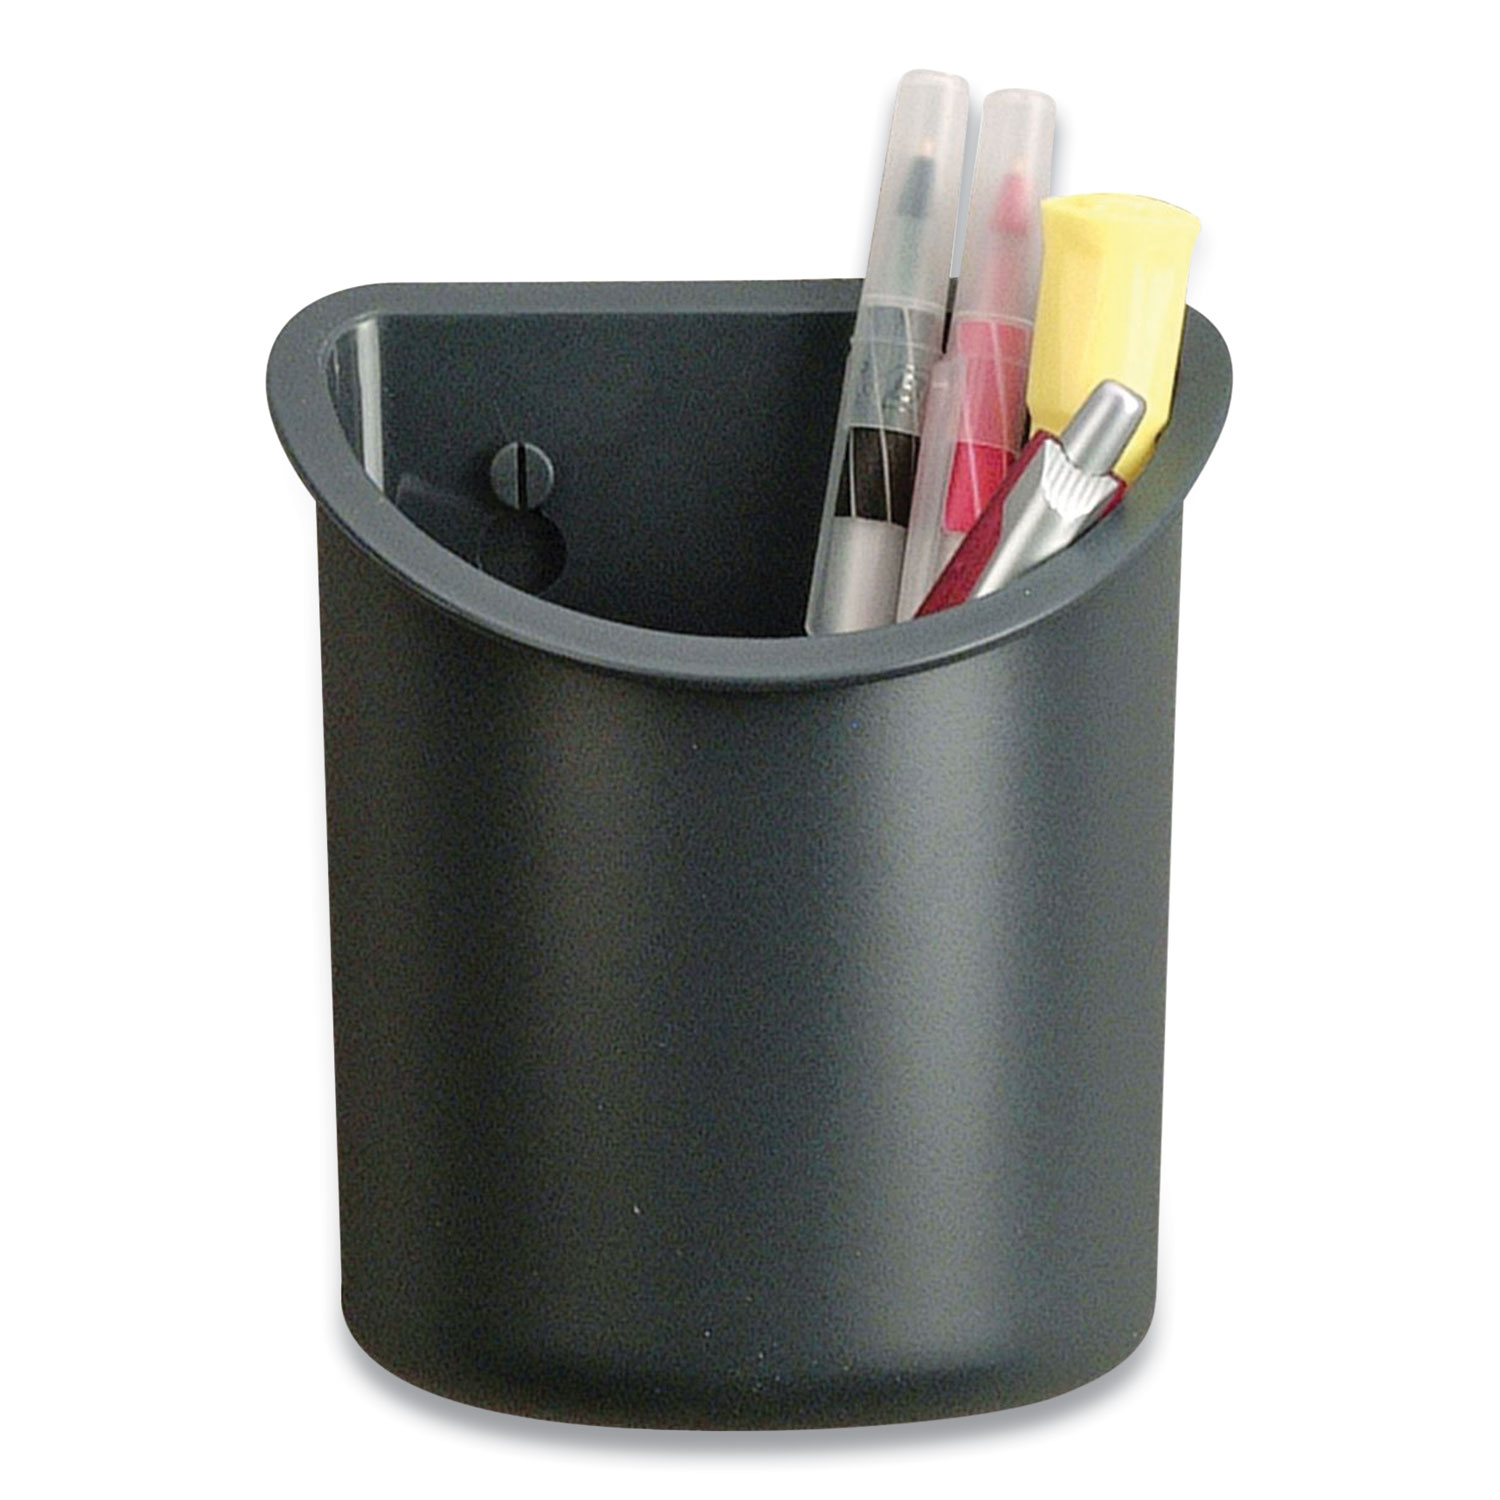  Officemate 29032 Verticalmate Plastic Pencil Cup, 5 h x 4.25 dia, Gray (OIC515105) 